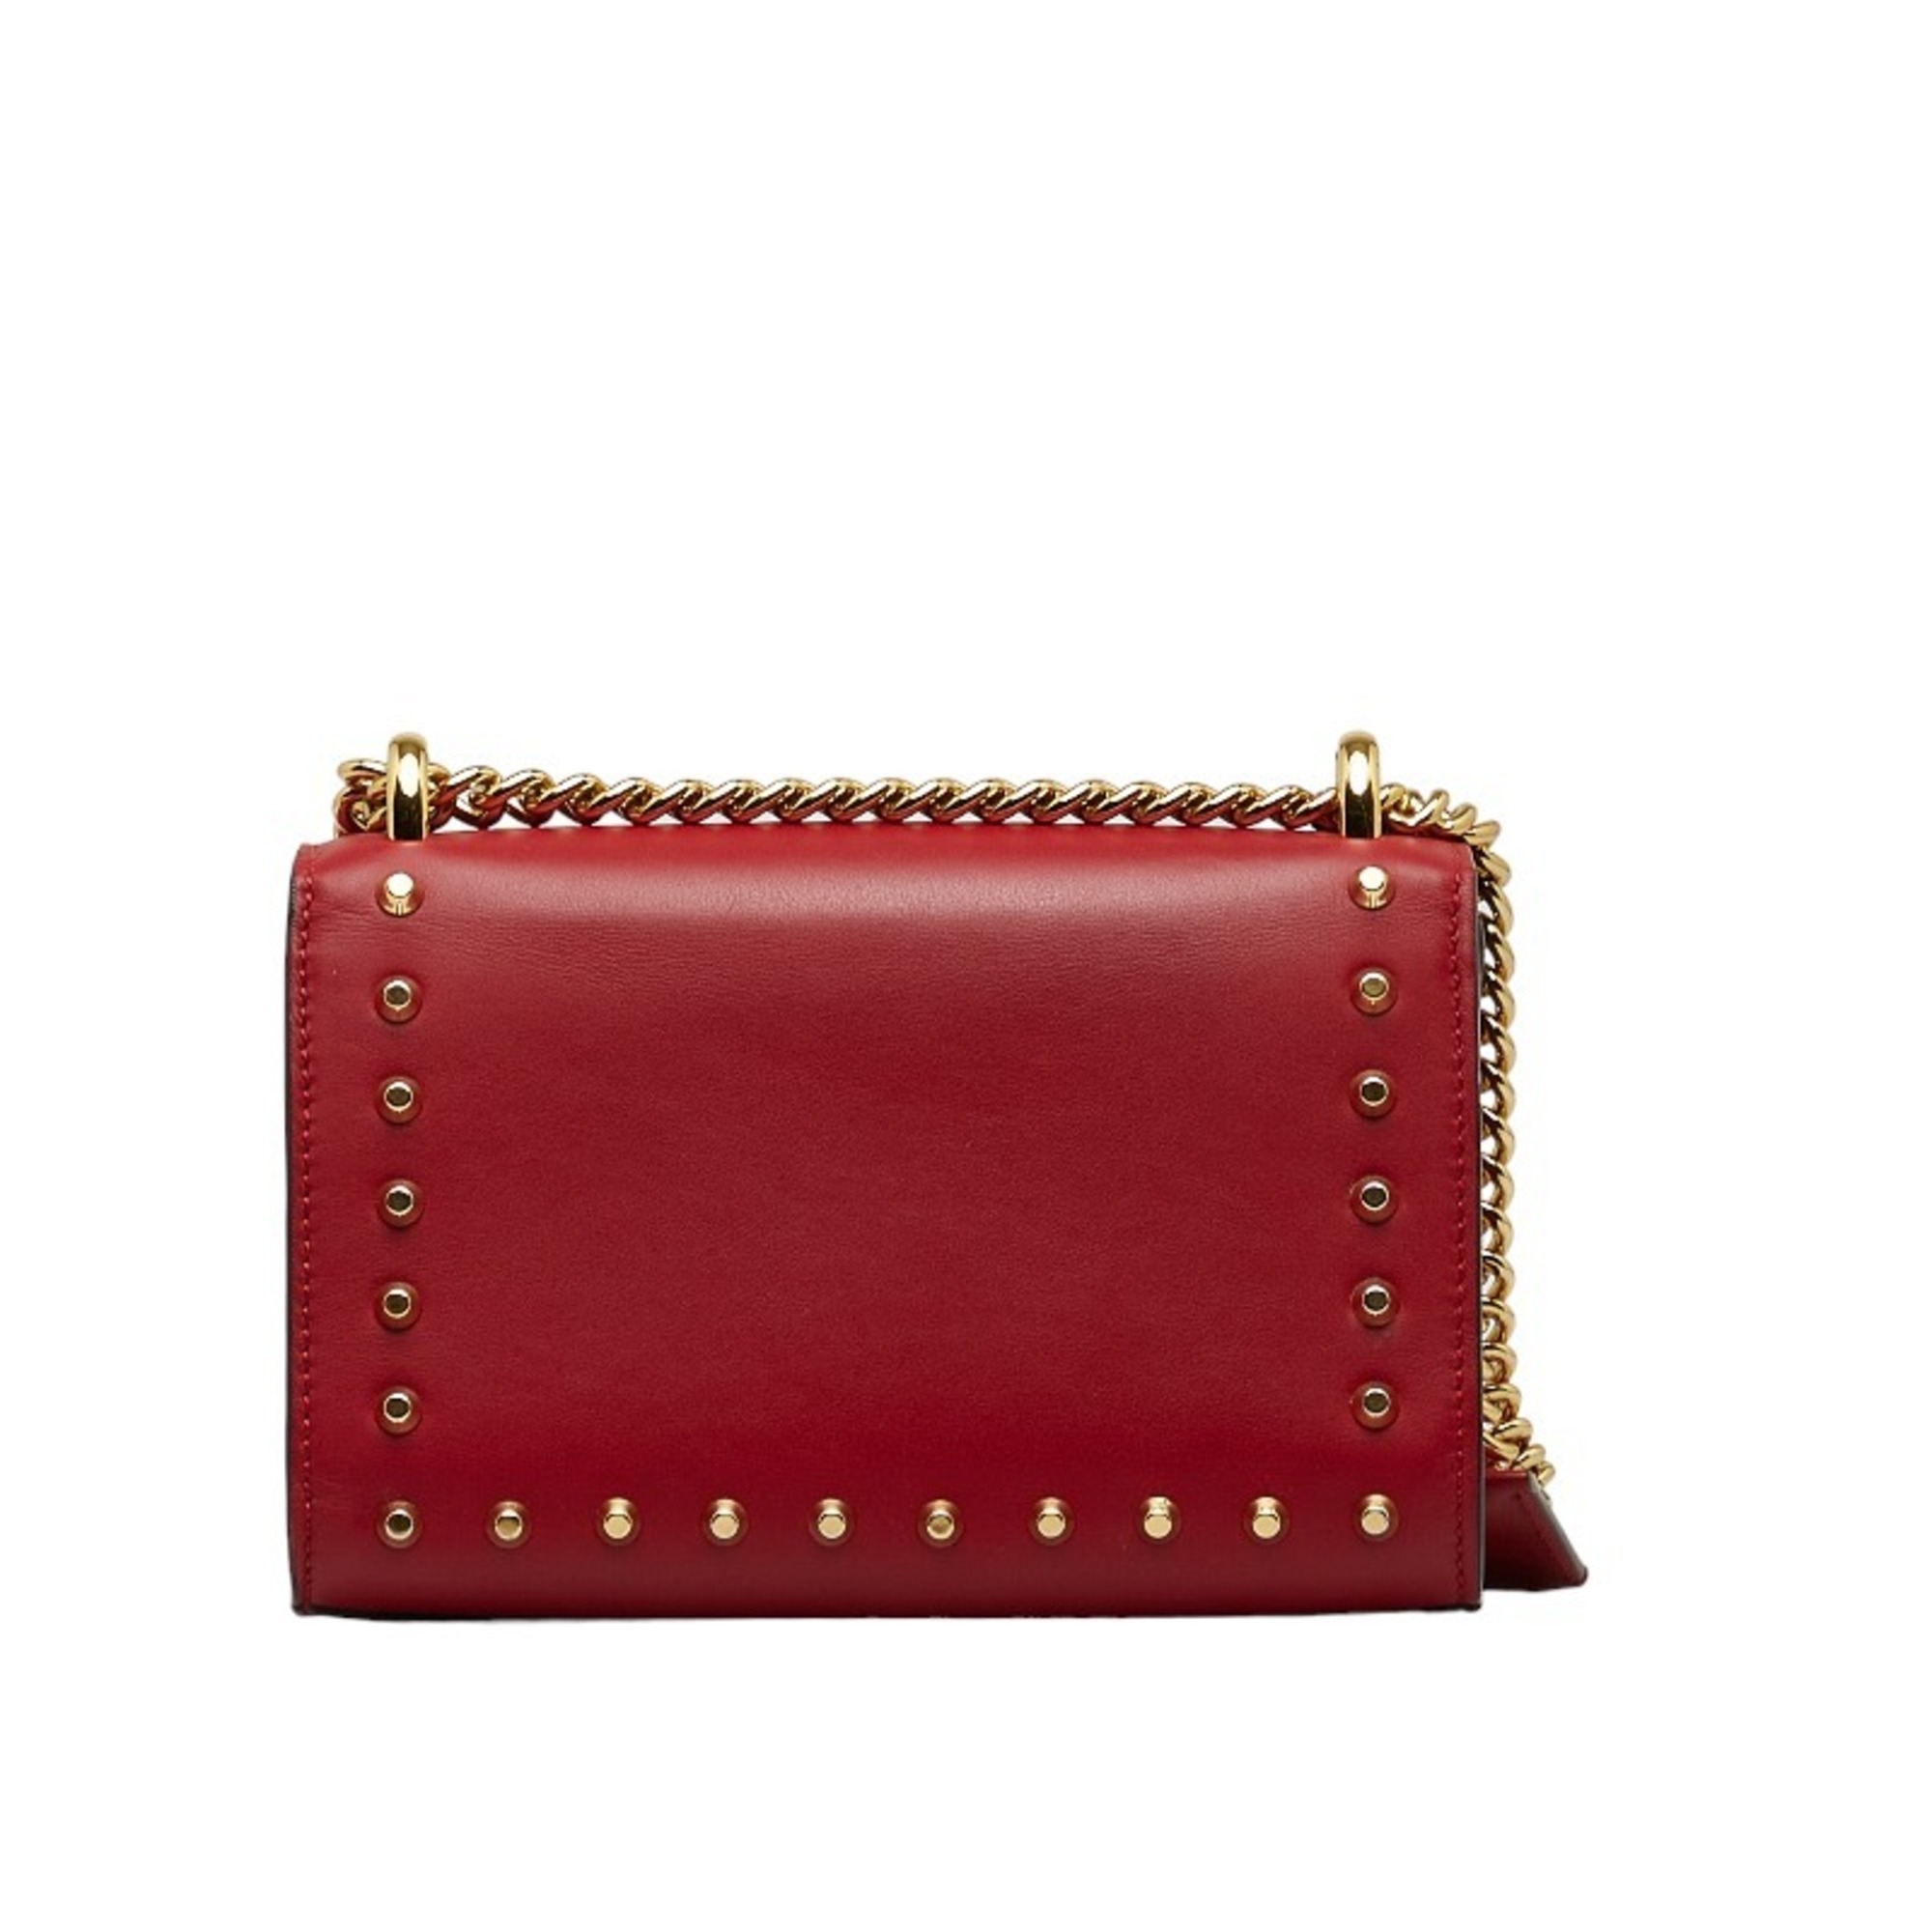 Gucci Paddock Studded Faux Pearl Chain Shoulder Bag 432182 Red Leather Women's GUCCI